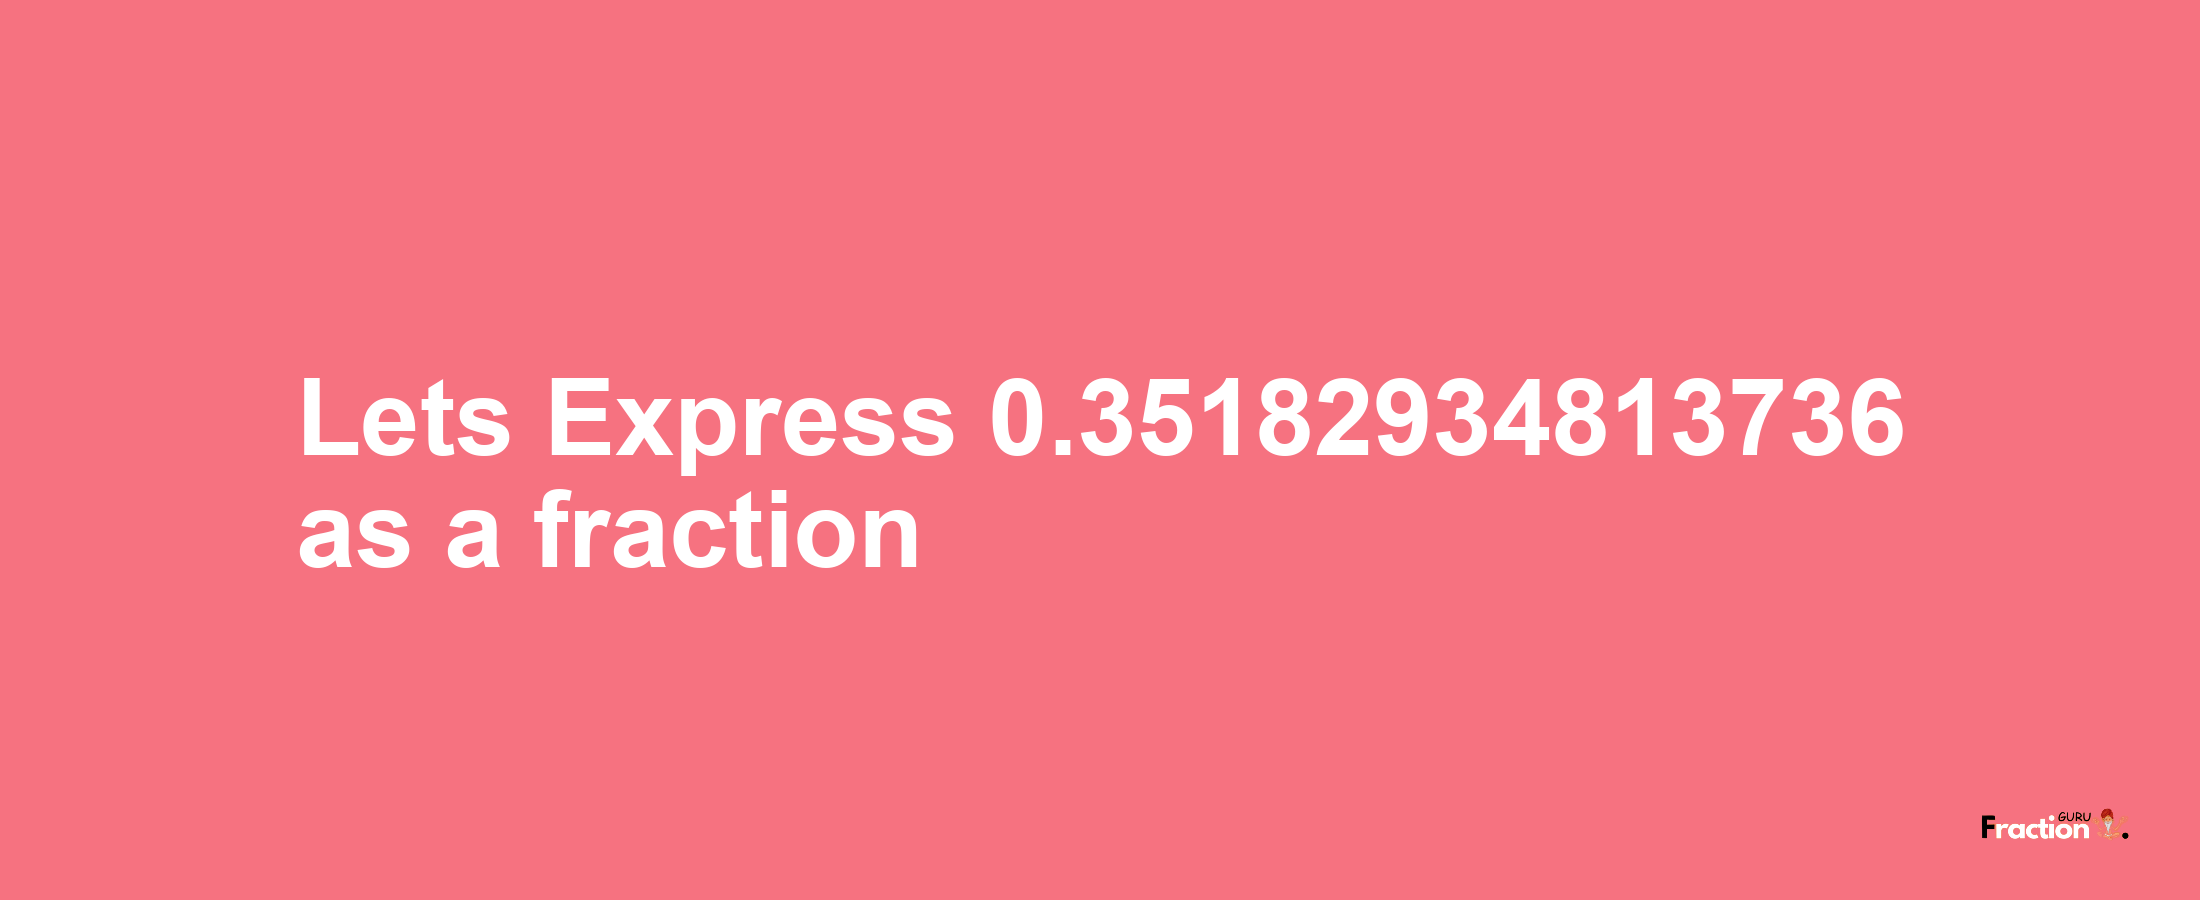 Lets Express 0.35182934813736 as afraction